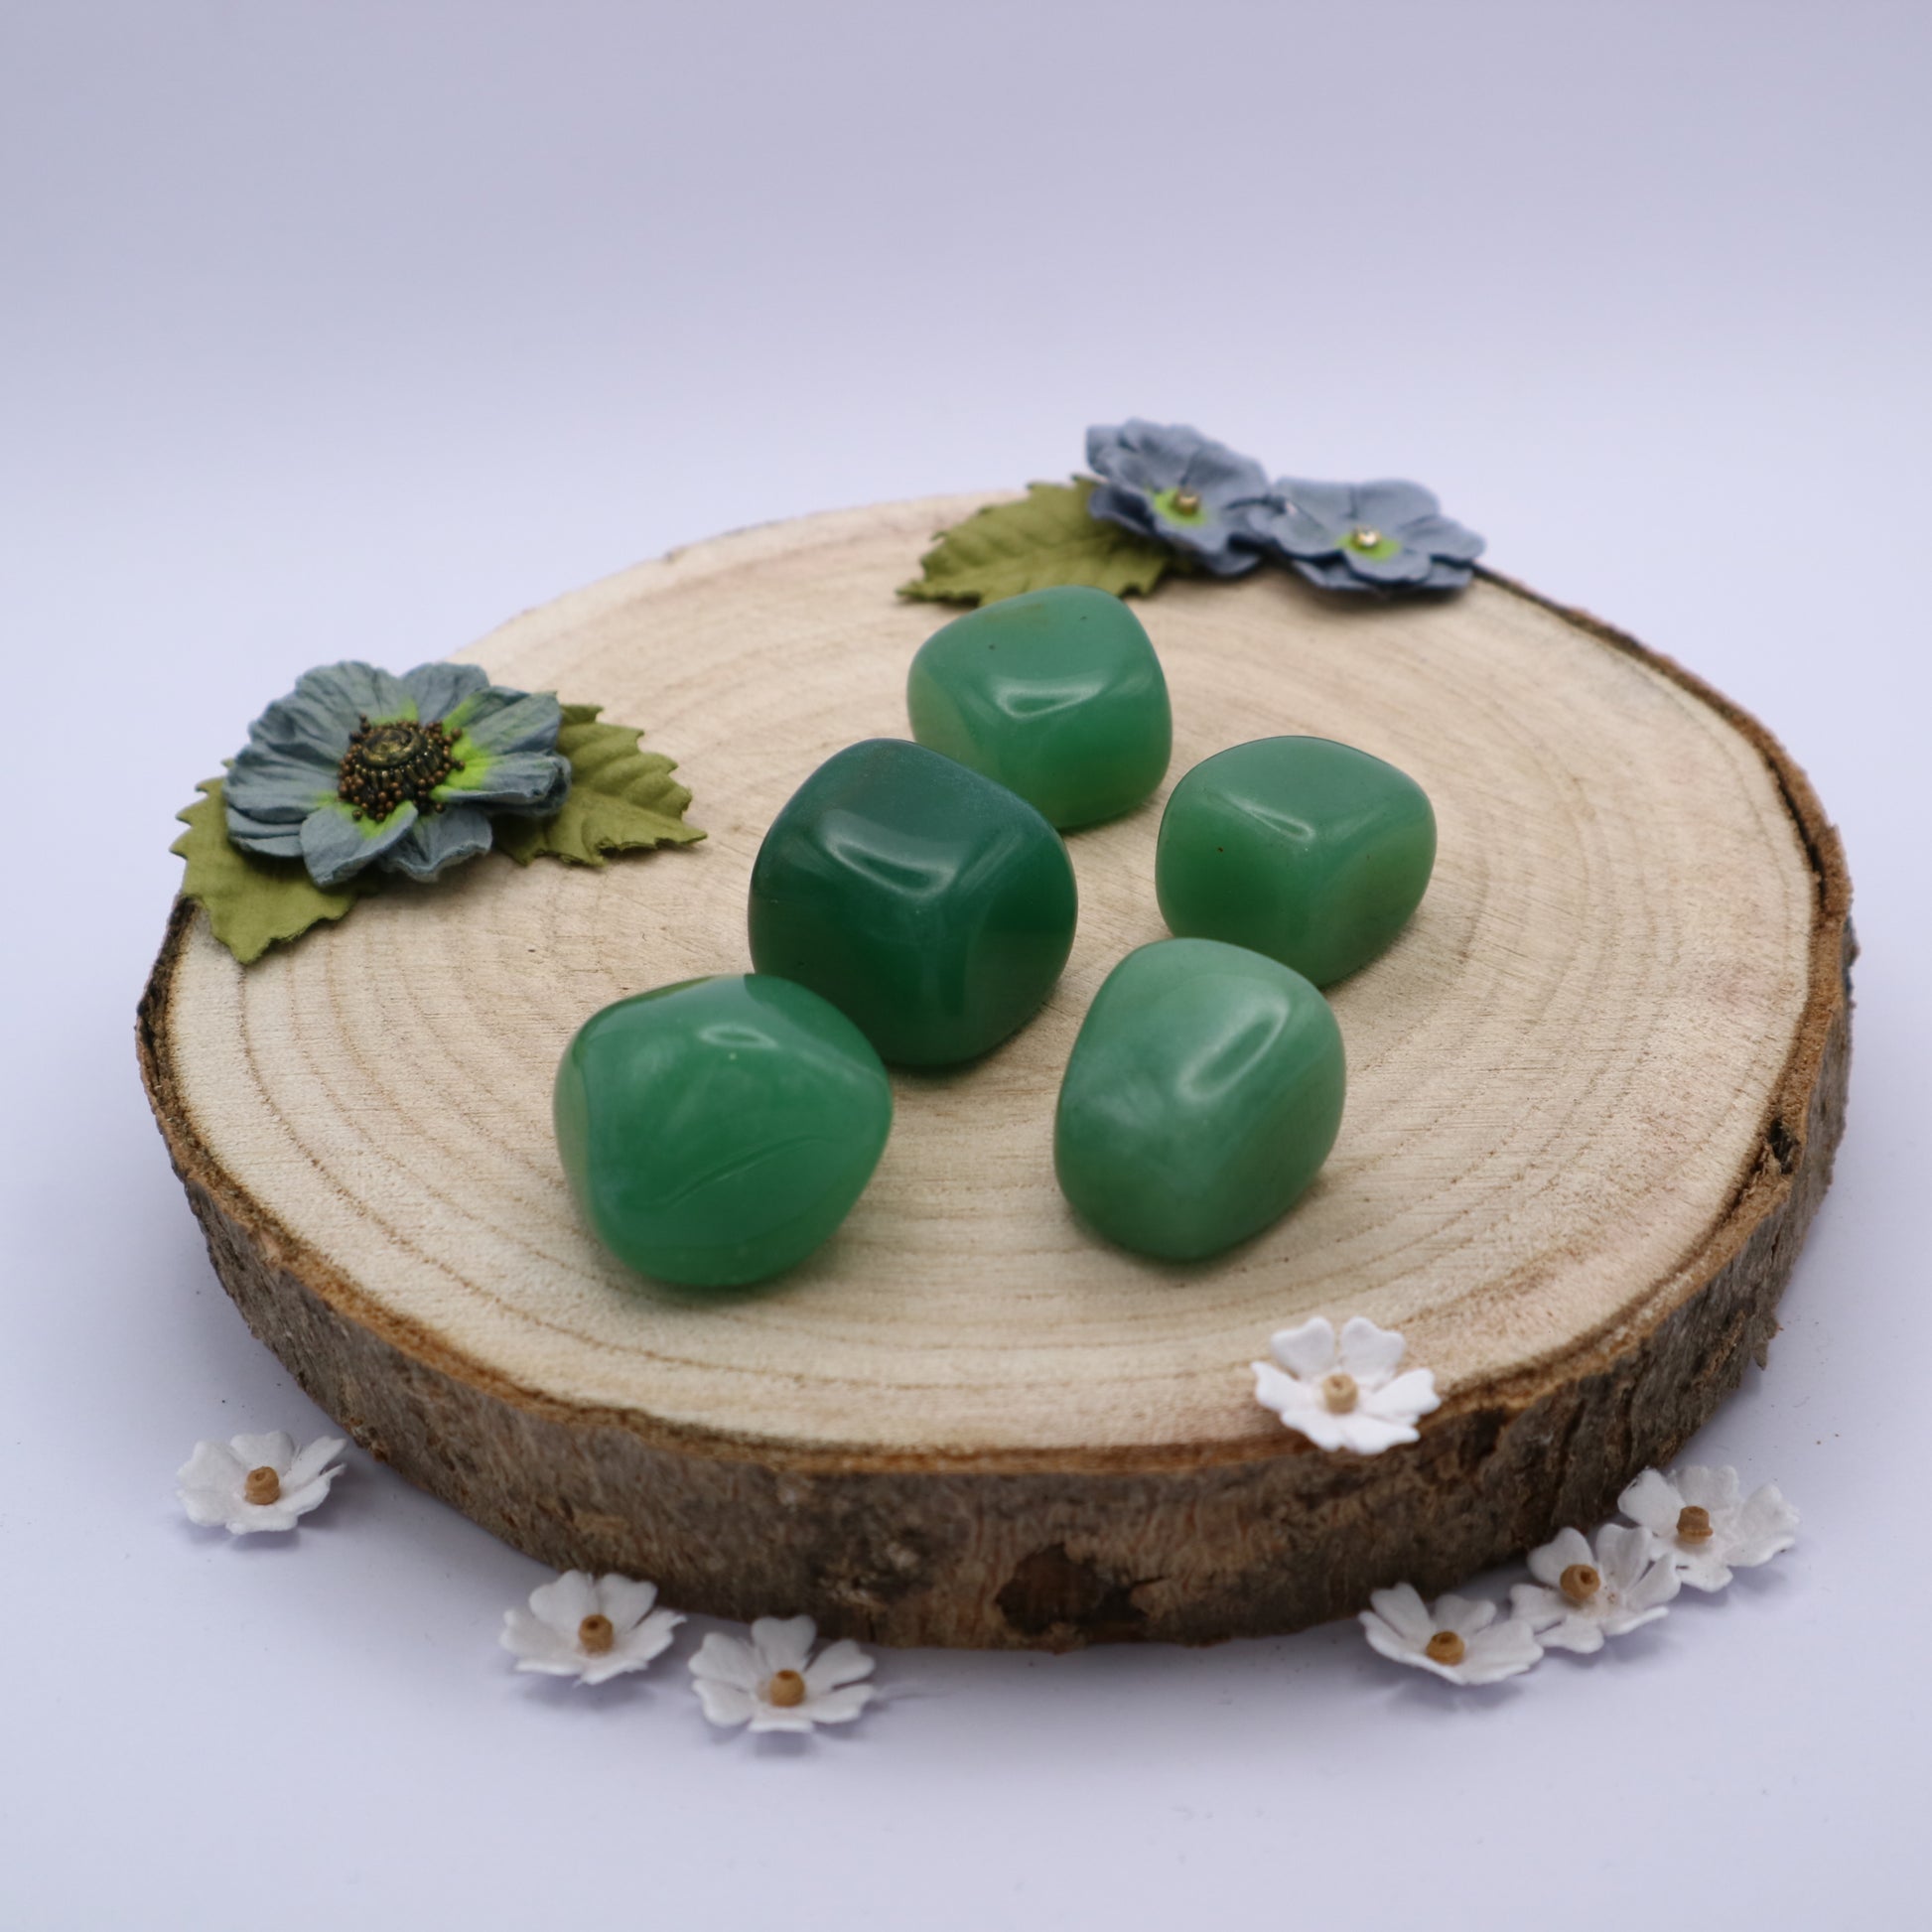 Five pieces of Green Aventurine crystals displayed on a piece of wood surrounded by flowers